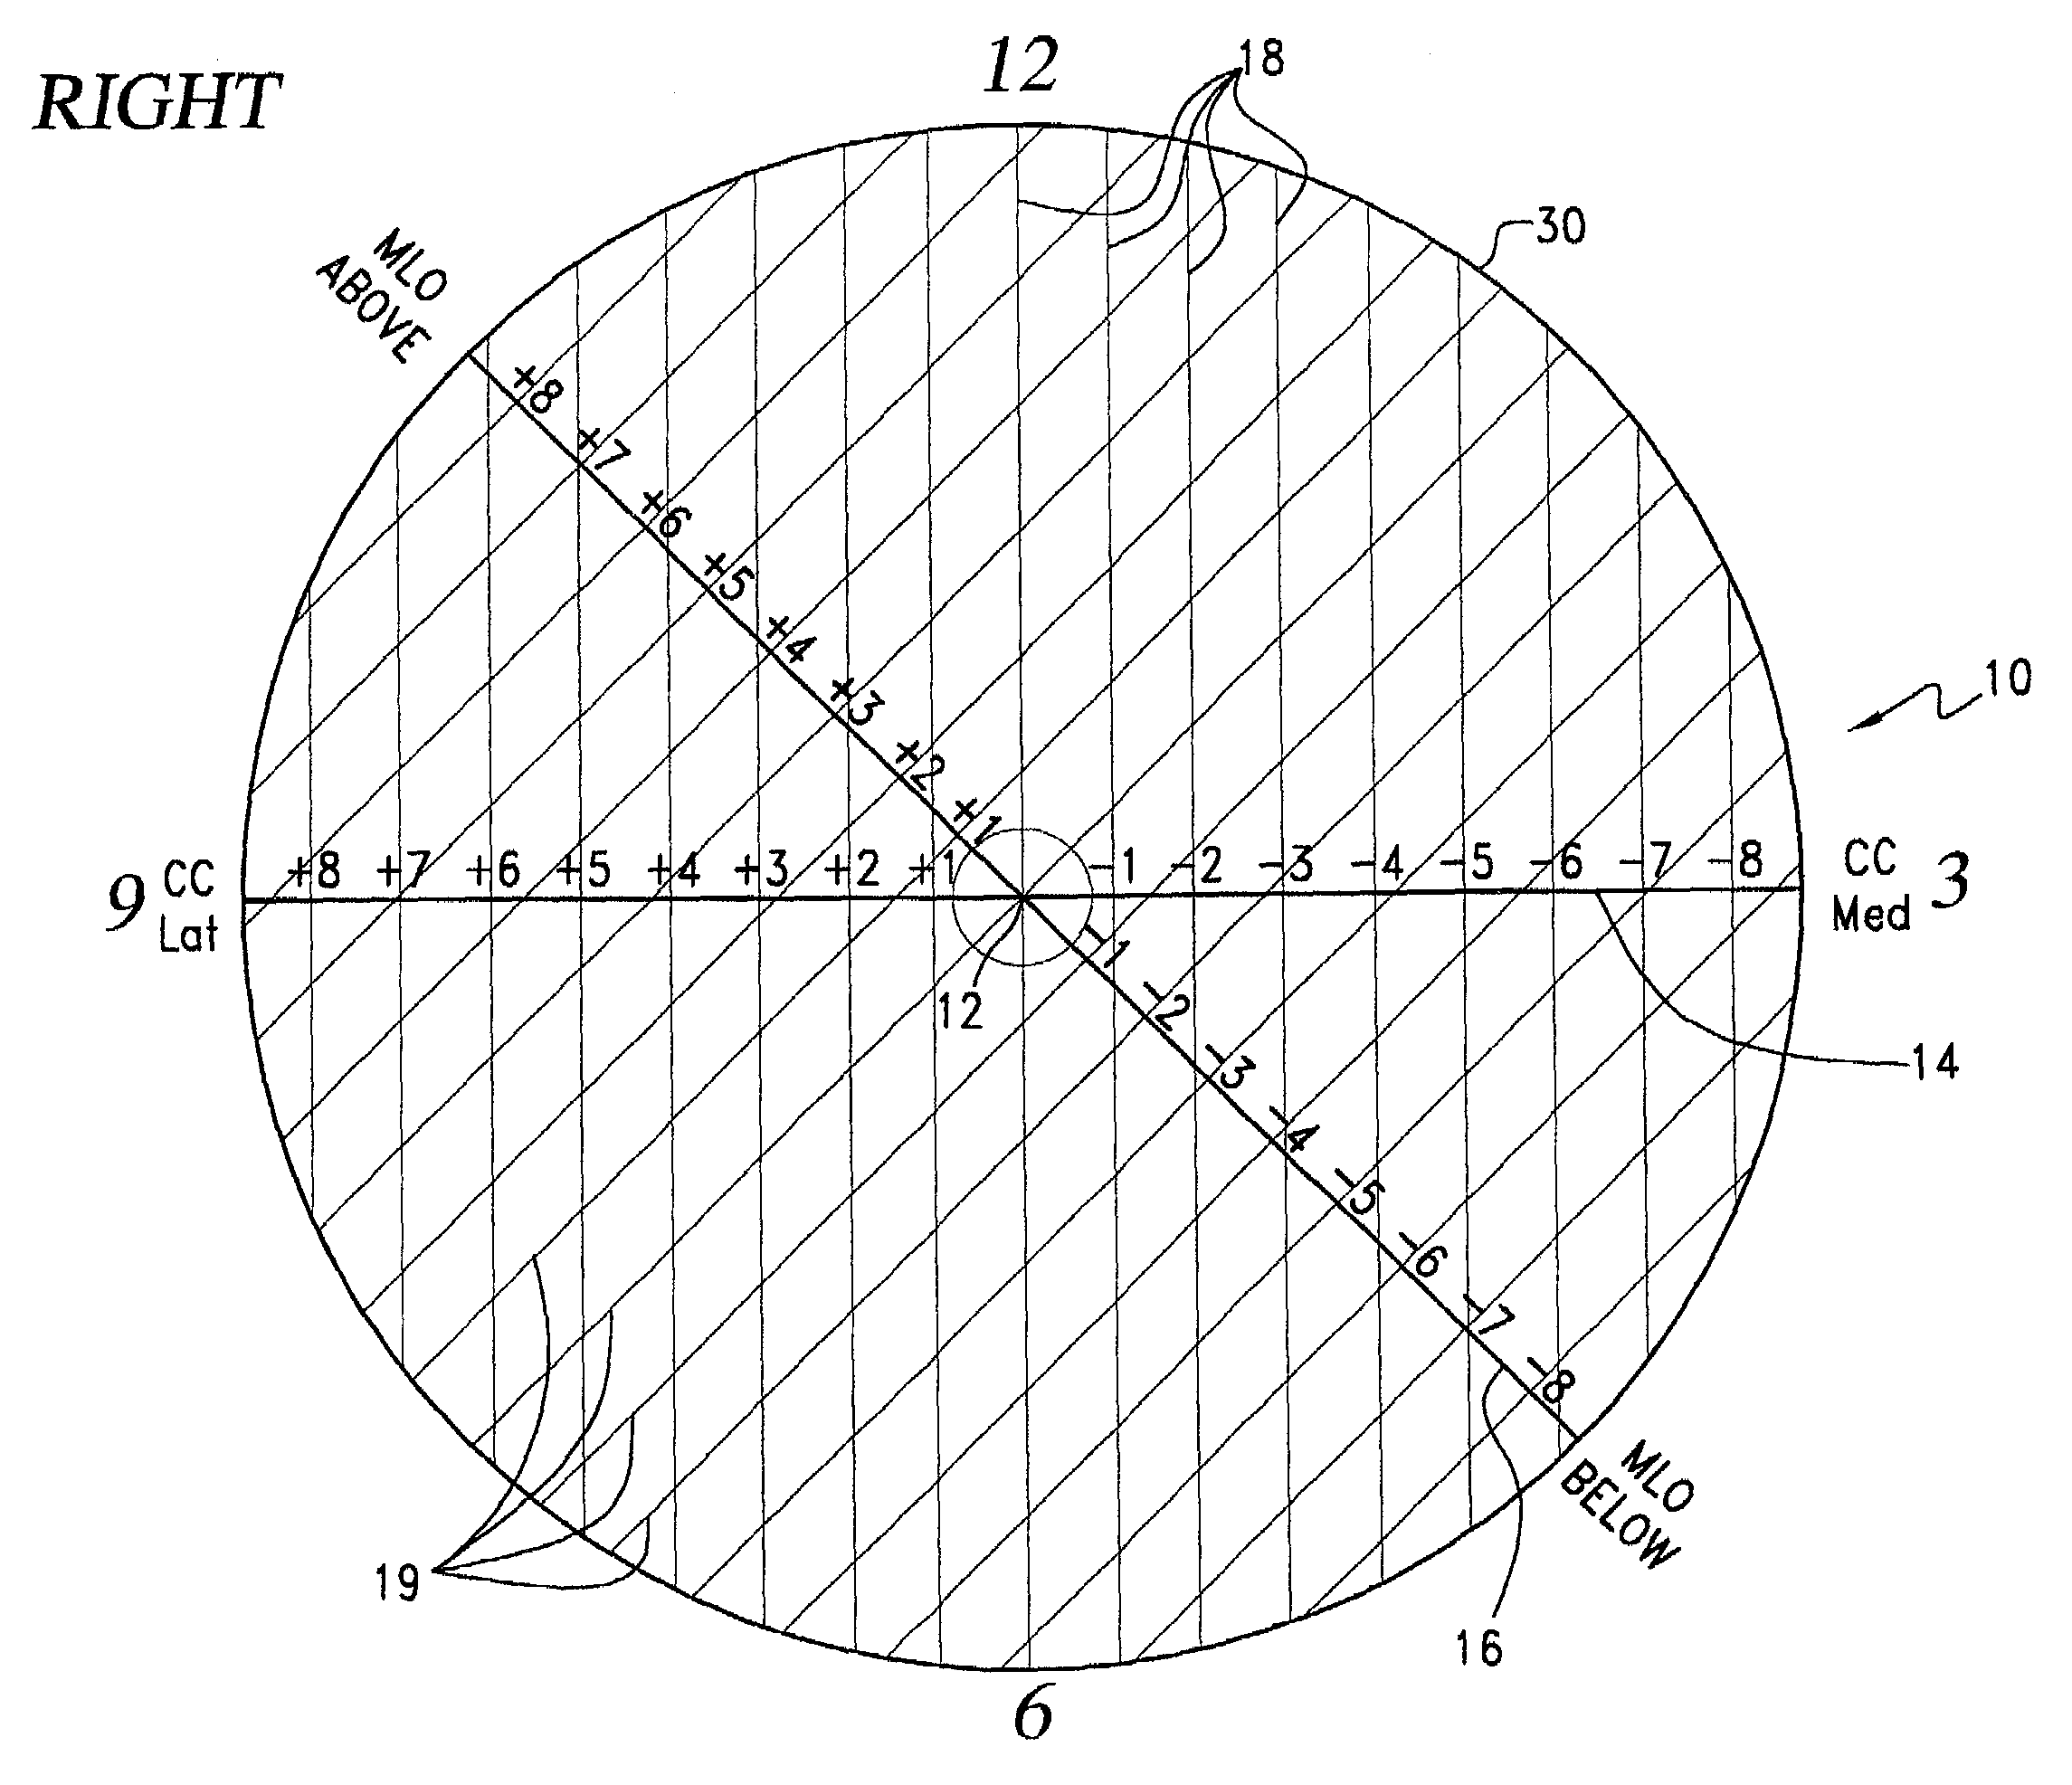 Template for the localization of lesions in a breast and method of use thereof